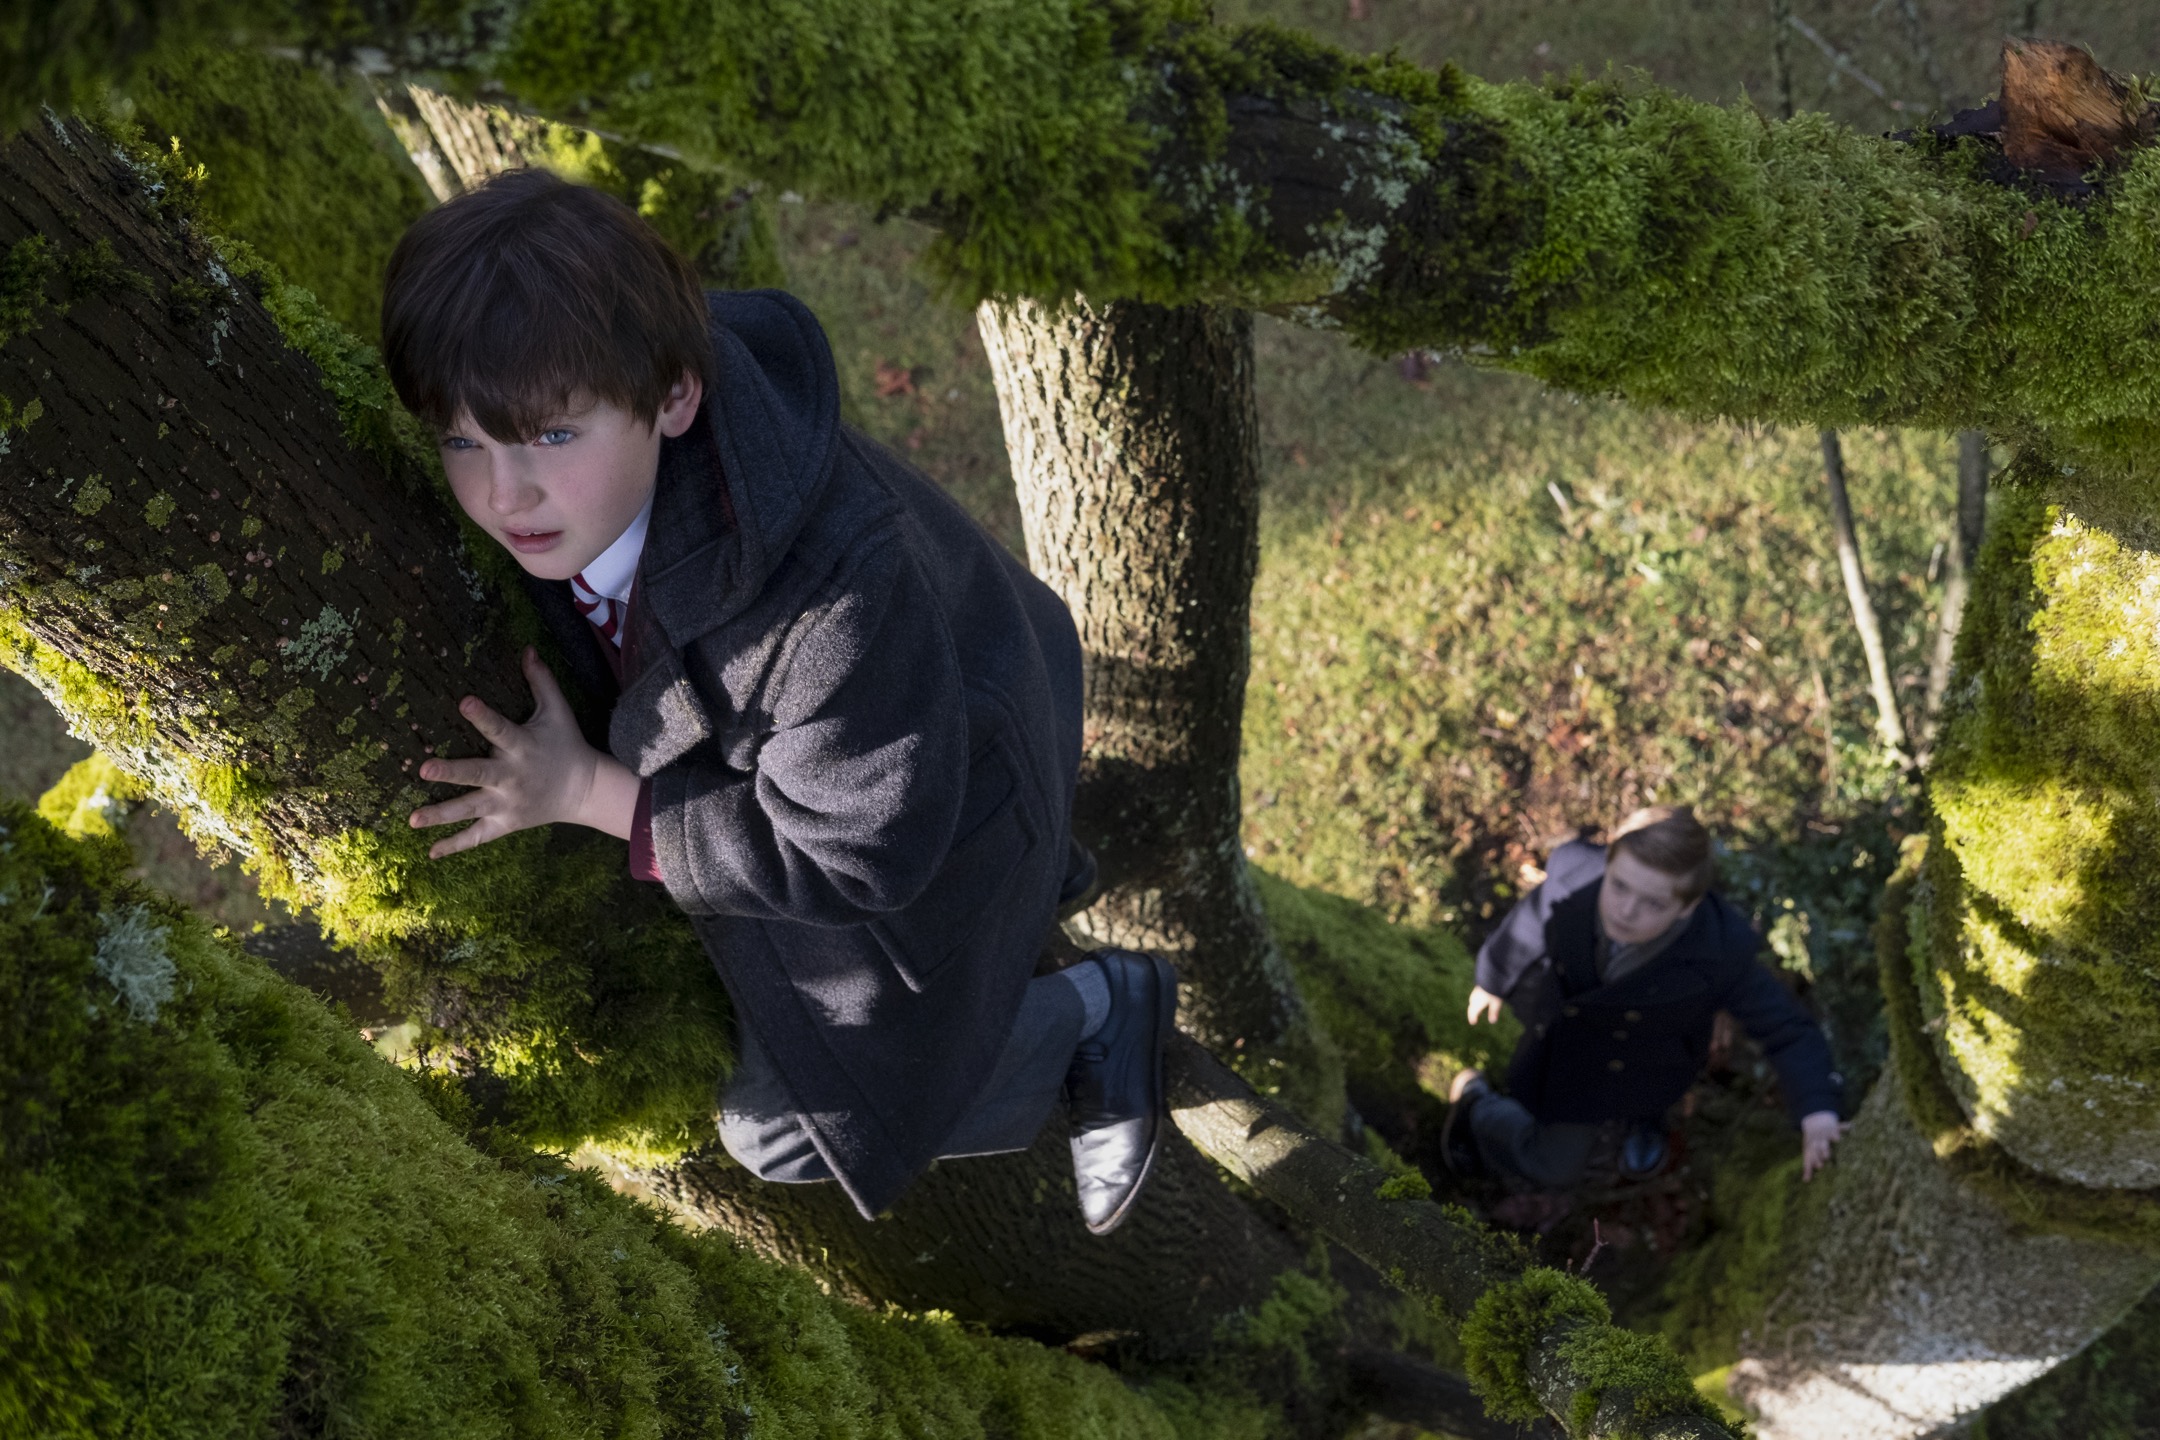 THE HAUNTING OF BLY MANOR (L to R) BENJAMIN EVAN AINSWORTH as MILES and RHYS STACK as HOOPER in episode 102 of THE HAUNTING OF BLY MANOR Cr. EIKE SCHROTER/NETFLIX © 2020